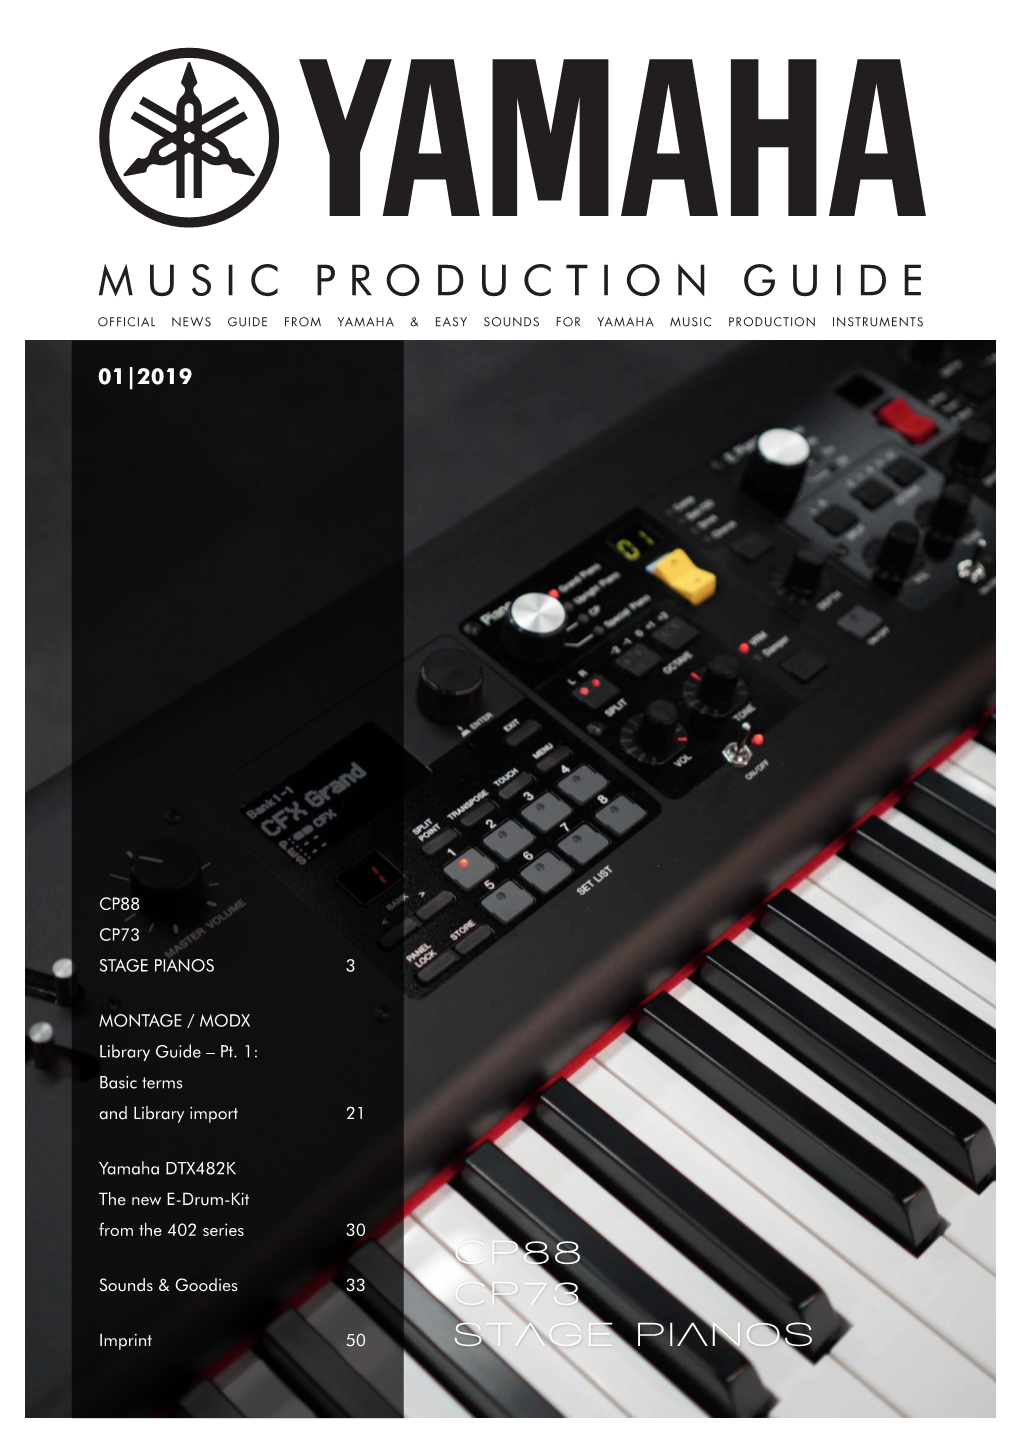 Music Production Guide